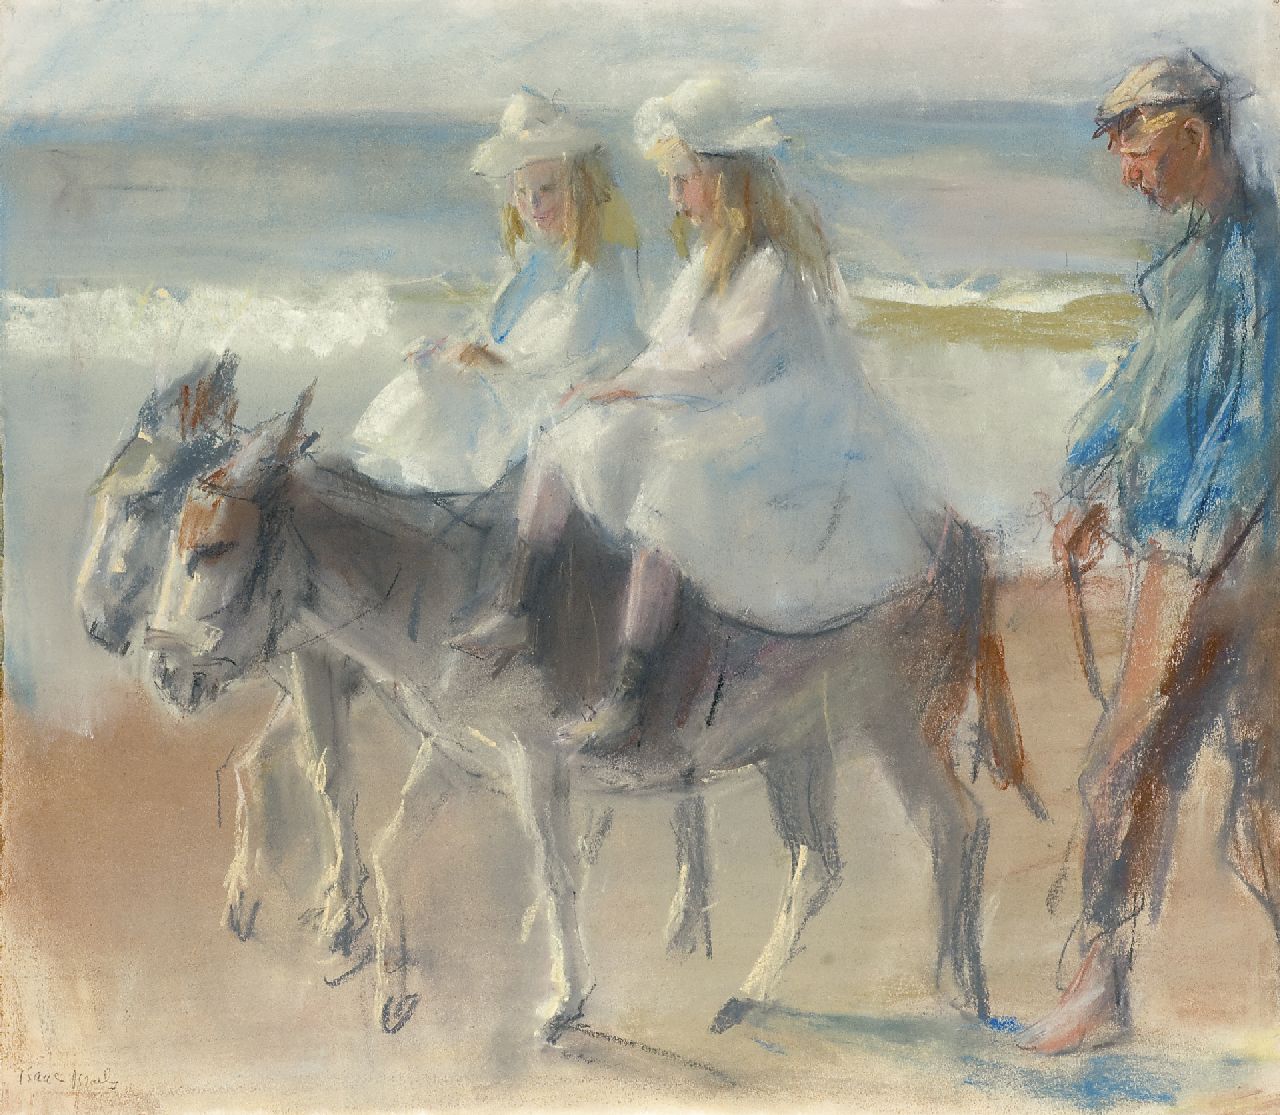 Israels I.L.  | 'Isaac' Lazarus Israels, A donkey-ride on the beach of Scheveningen, pastel on paper 49.5 x 56.6 cm, signed l.l.